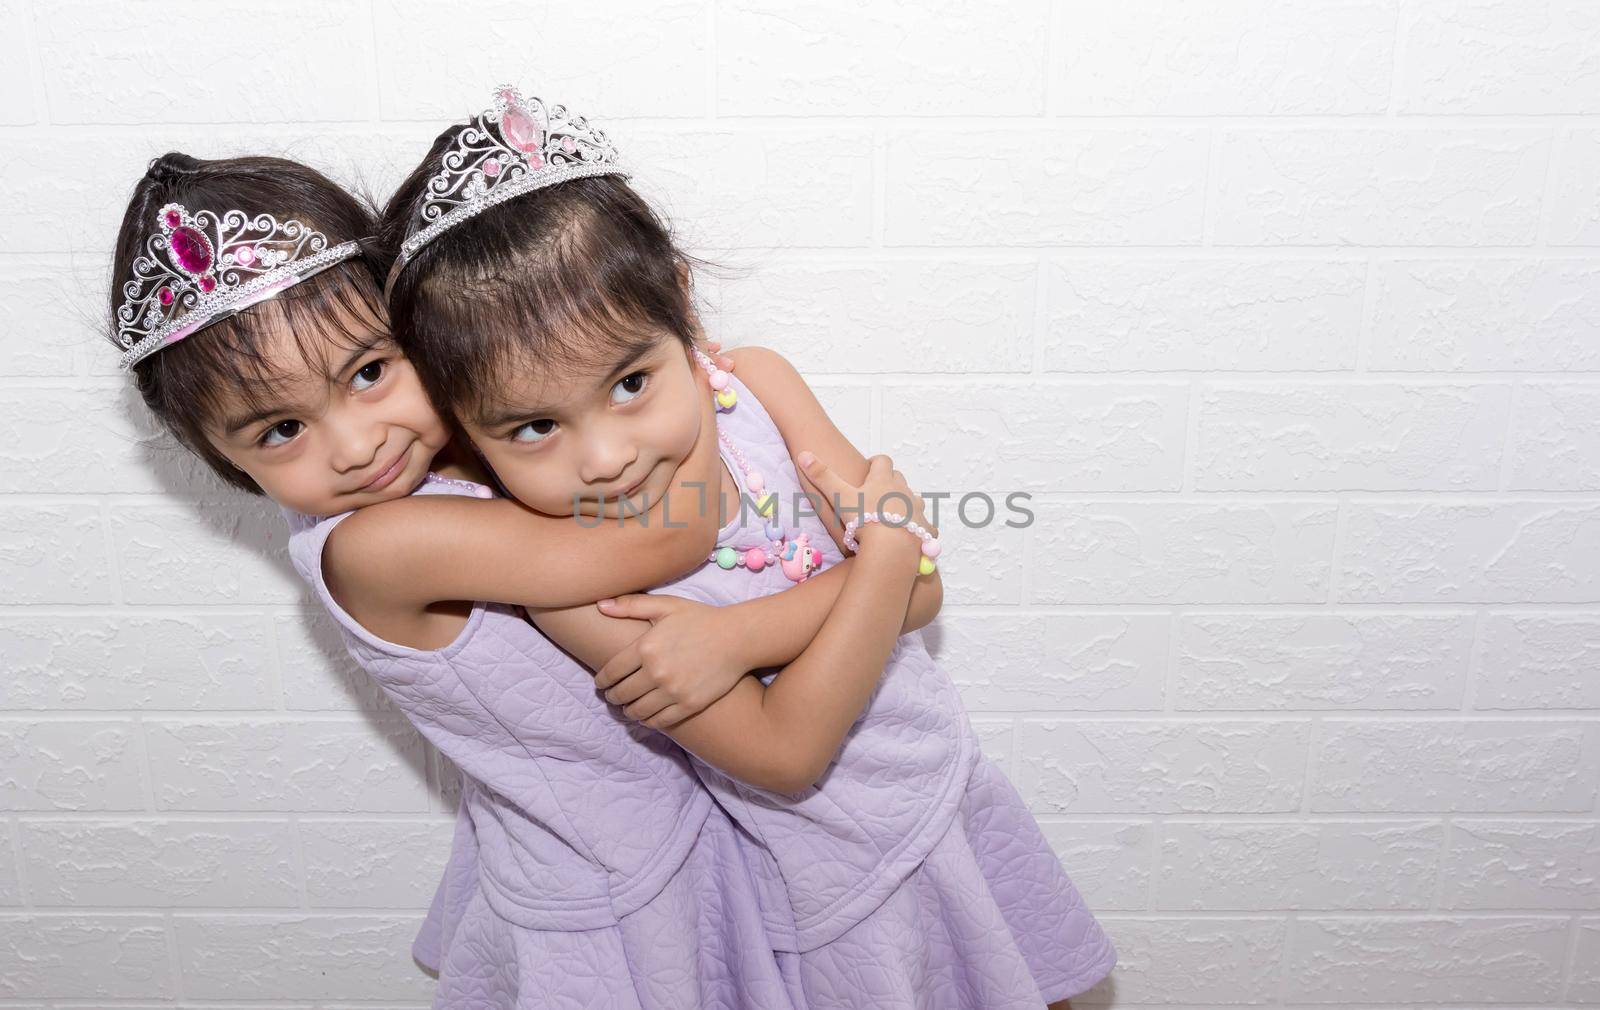 Female asian identical twins sitting on chair with white background. Wearing purple dress and accessories. Standing hugging each other by billroque